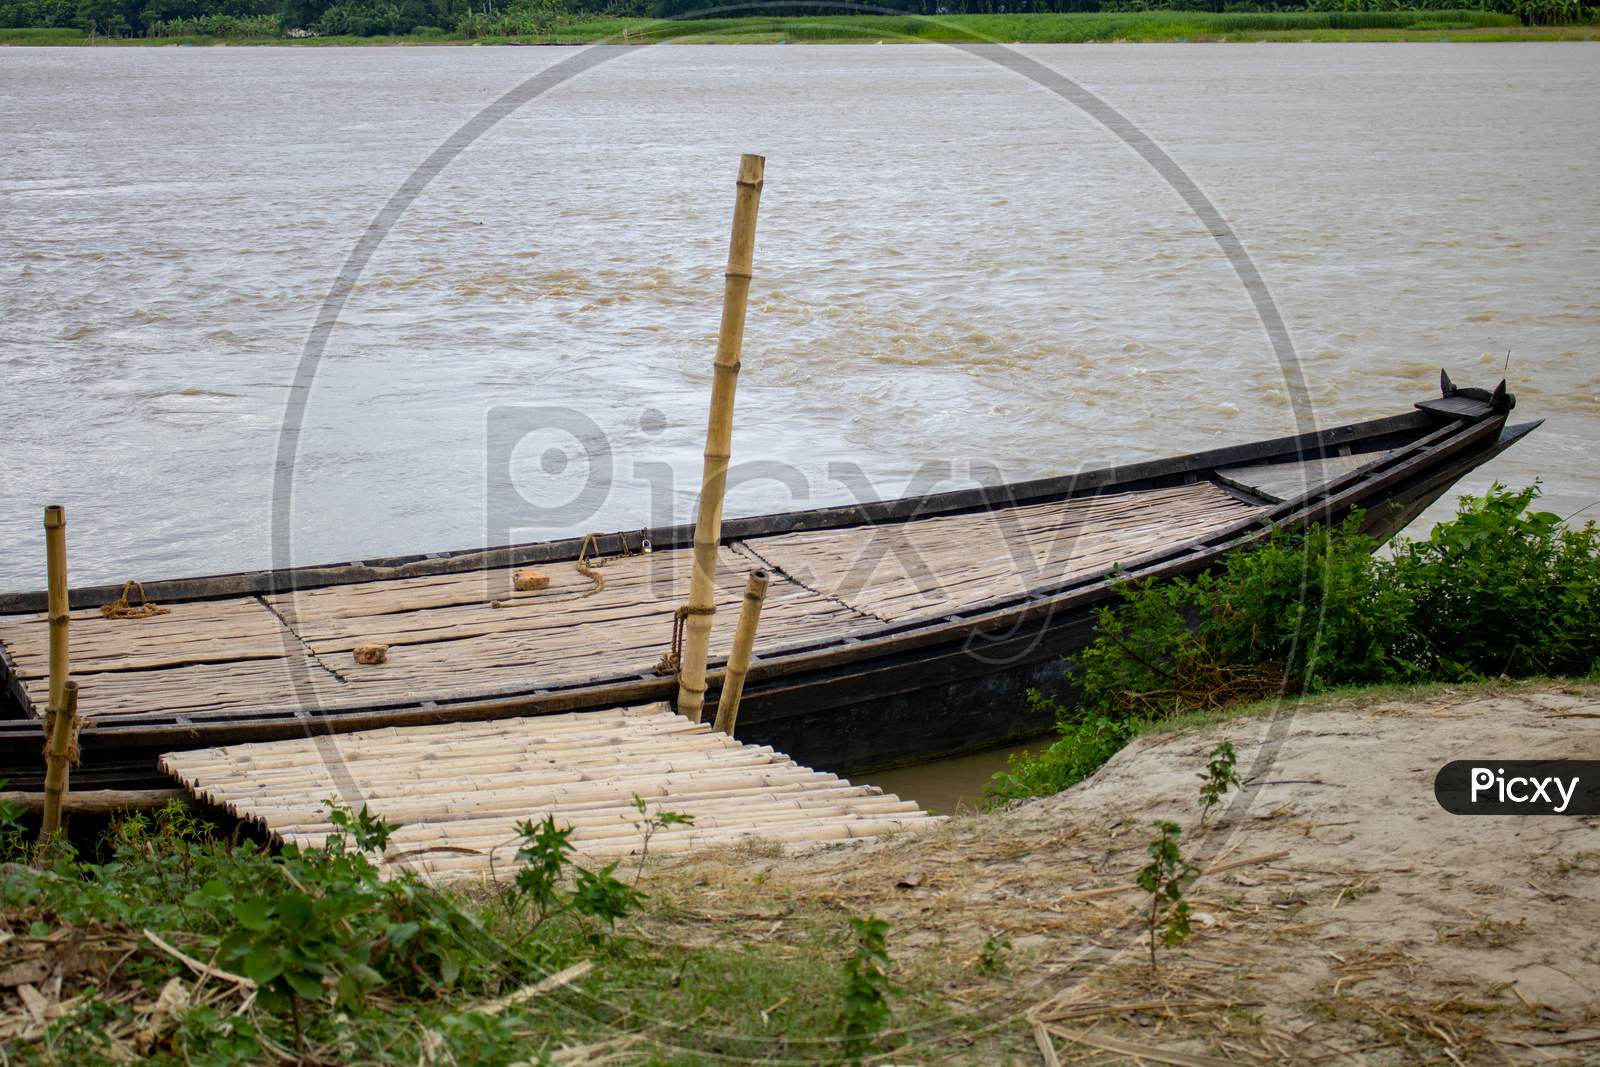 A Large Wooden Boat Tied To The River Bank. This Is A Big River Crossing Boat. A Beautiful River Of Bangladesh.